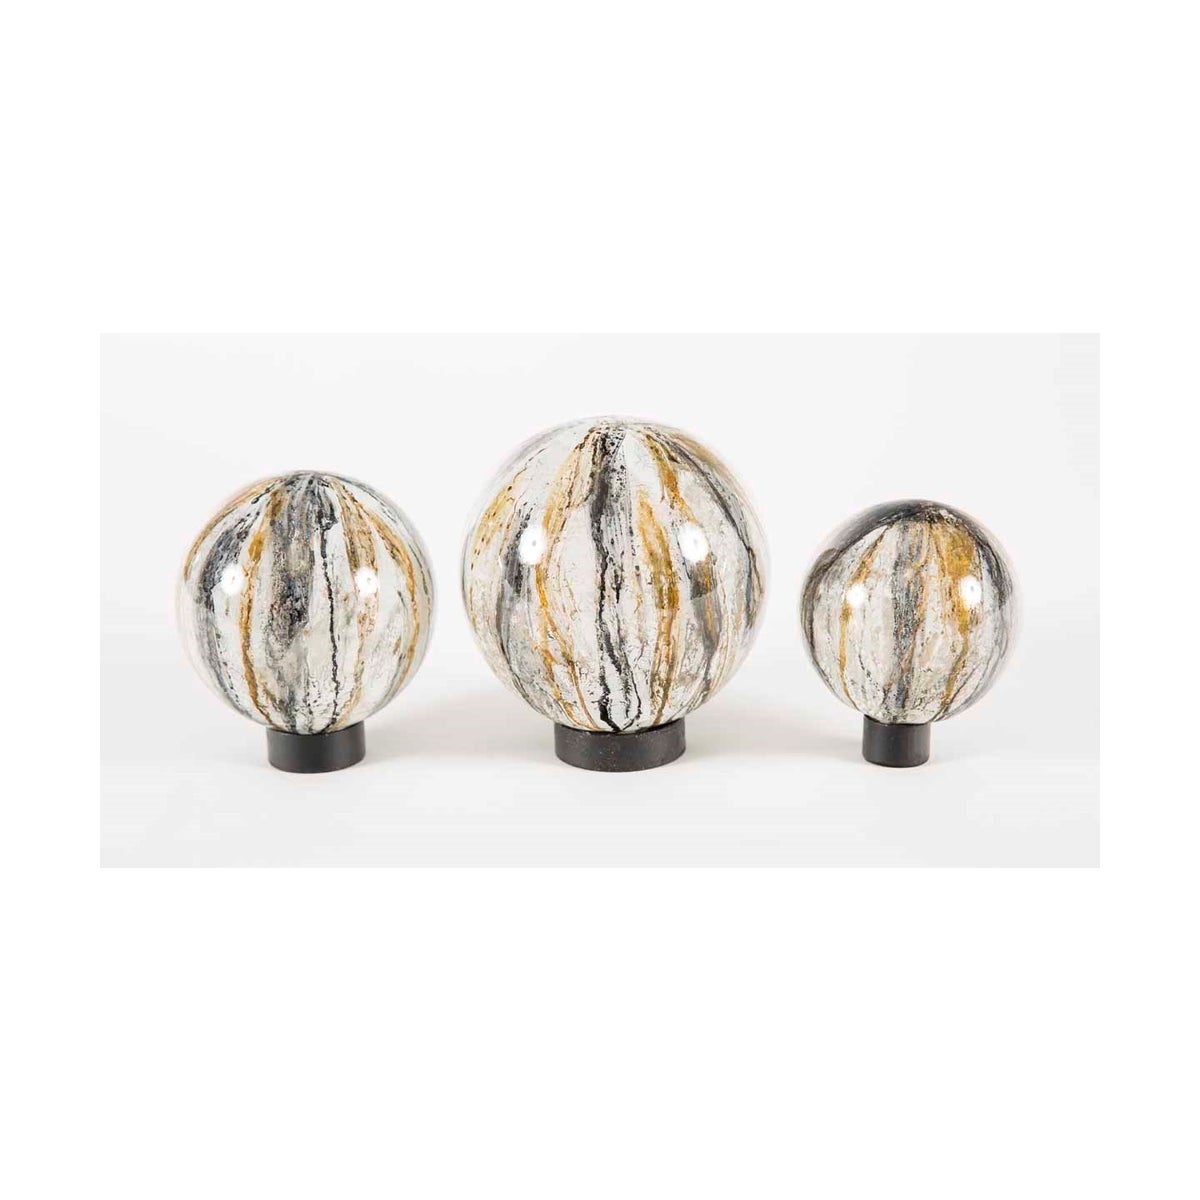 Set of 3 Glass Balls on Iron Ring Stands in Gray Whisper Finish